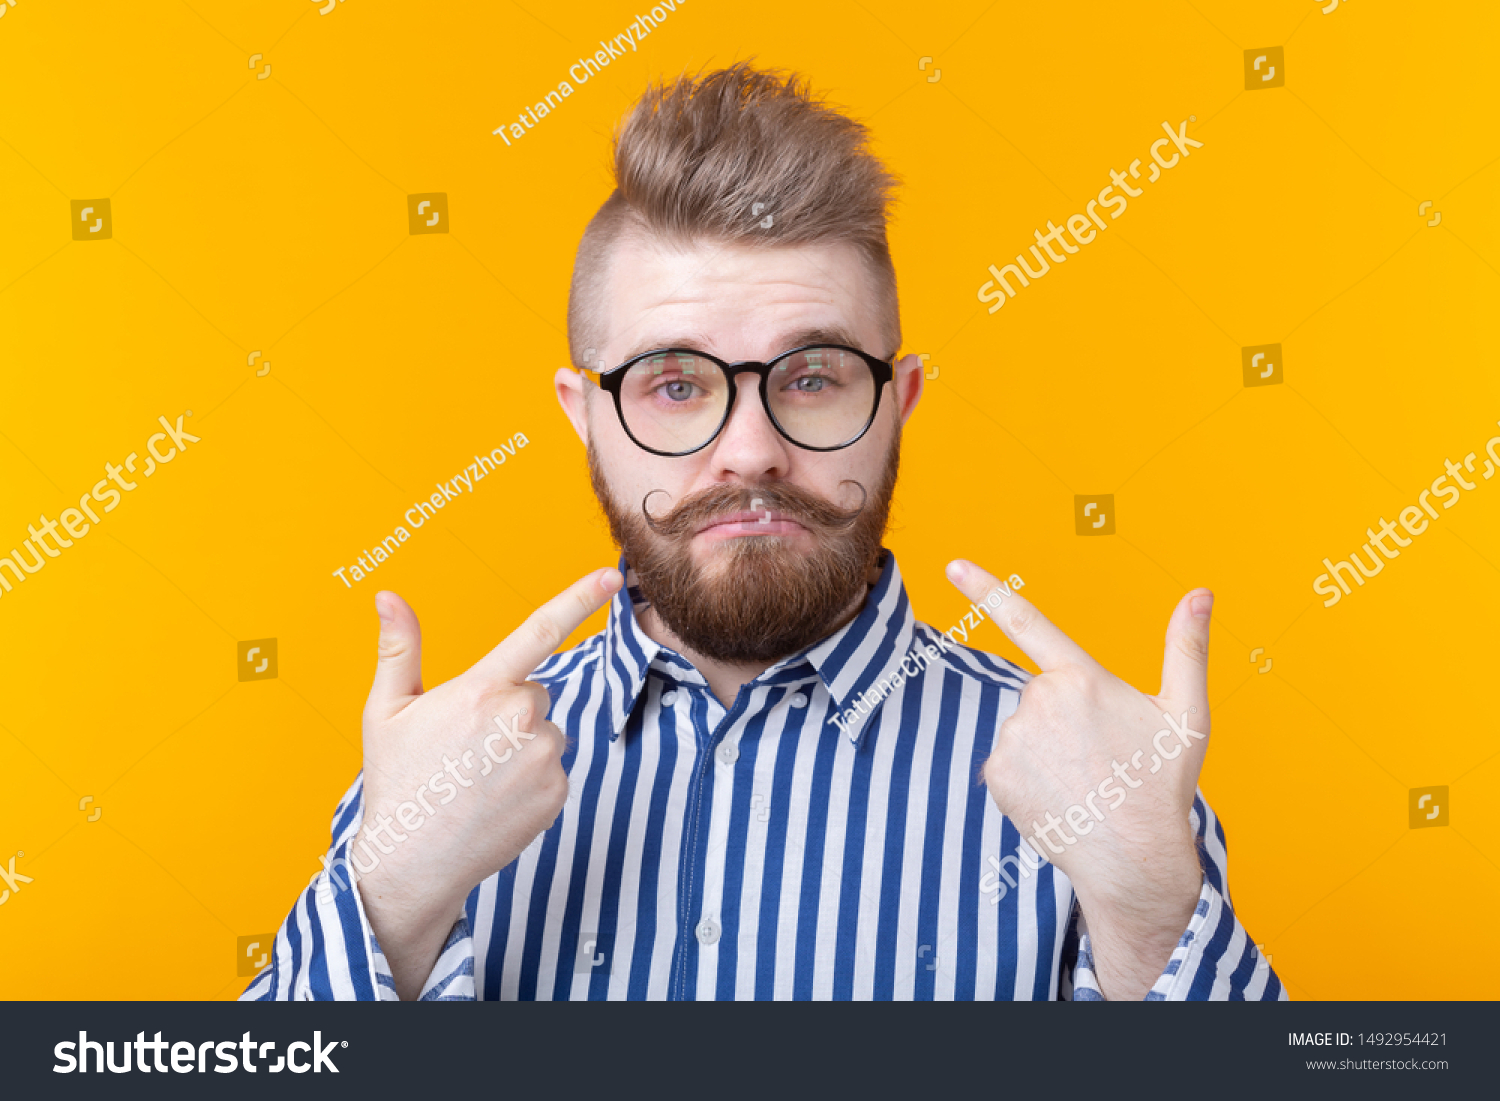 Charming confident young fashion hipster man with glasses and a beard shows on himself posing over a yellow background. Place for advertising. The concept of self-confidence and success. #1492954421